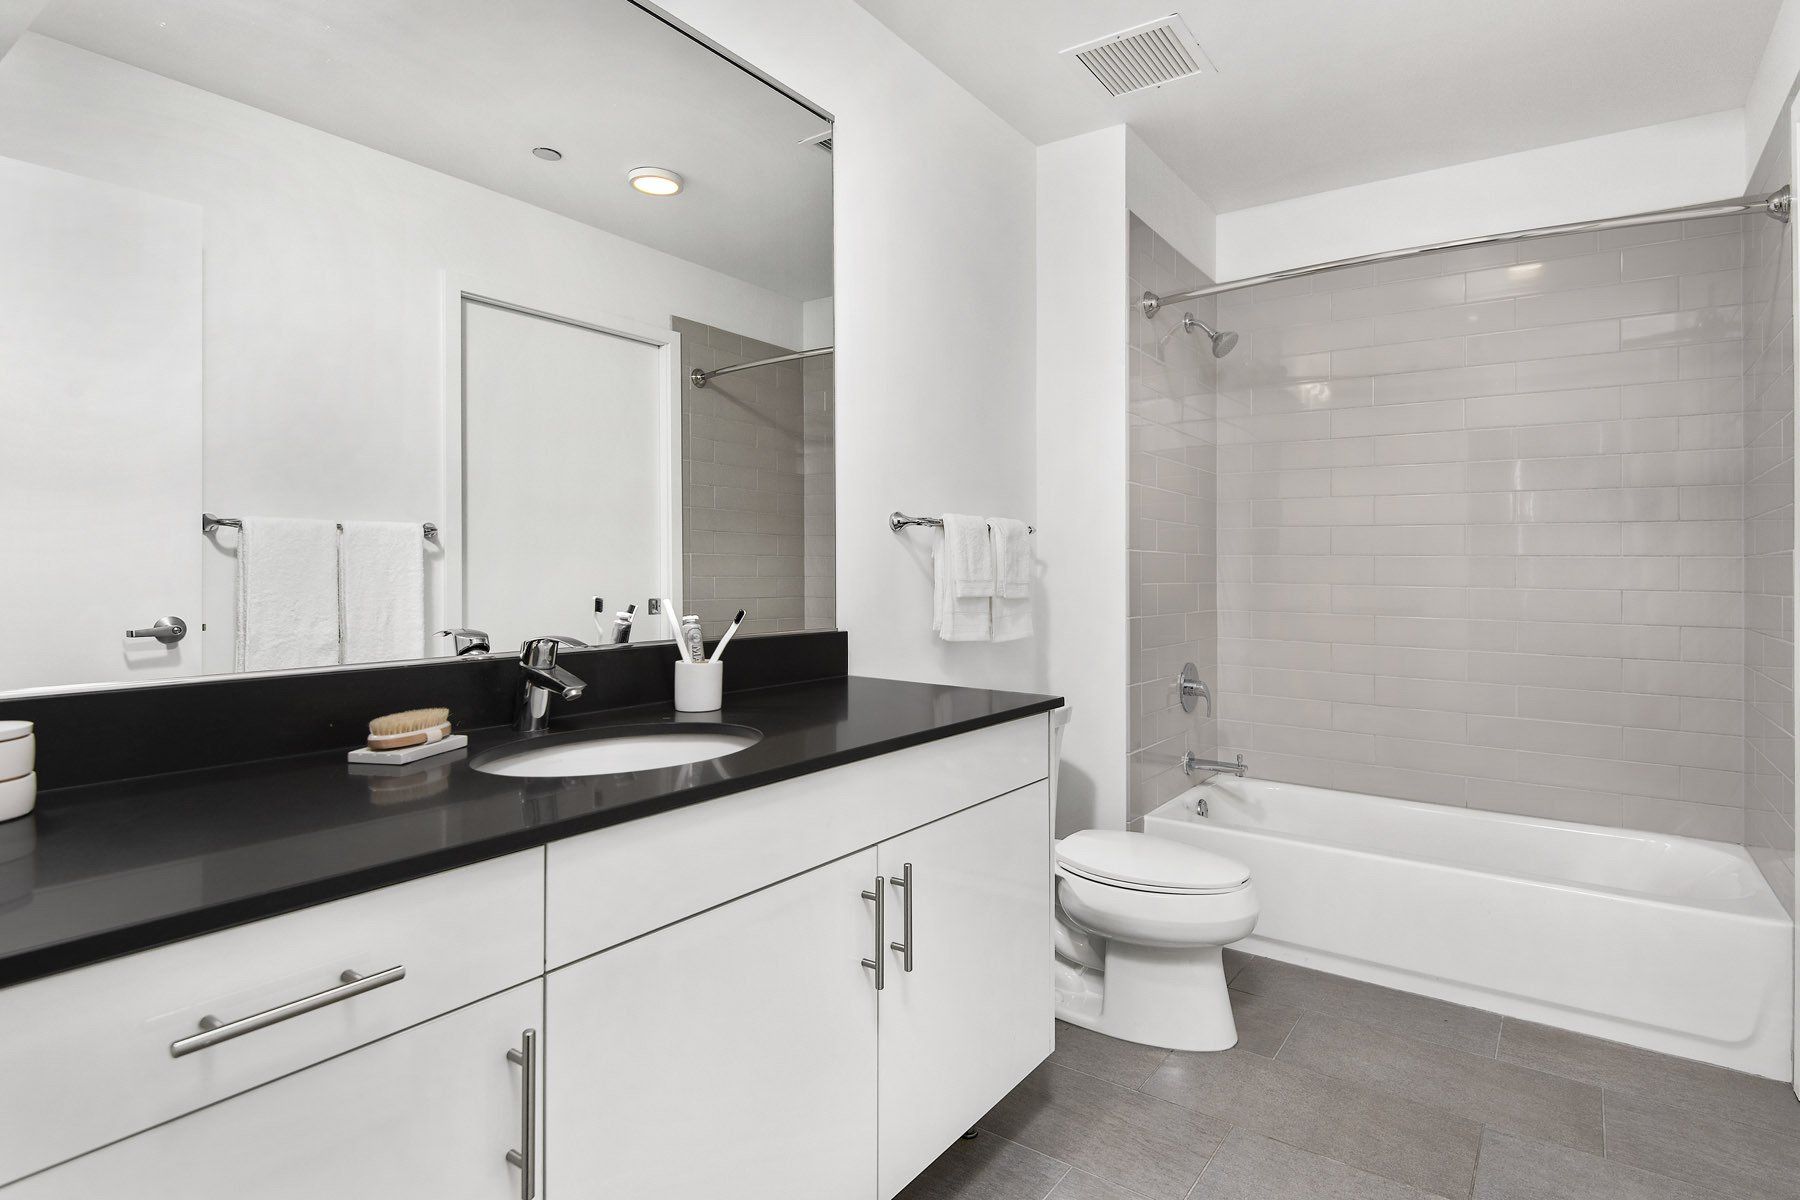 A bathroom with a sink , toilet and bathtub at Reside on Green Street.